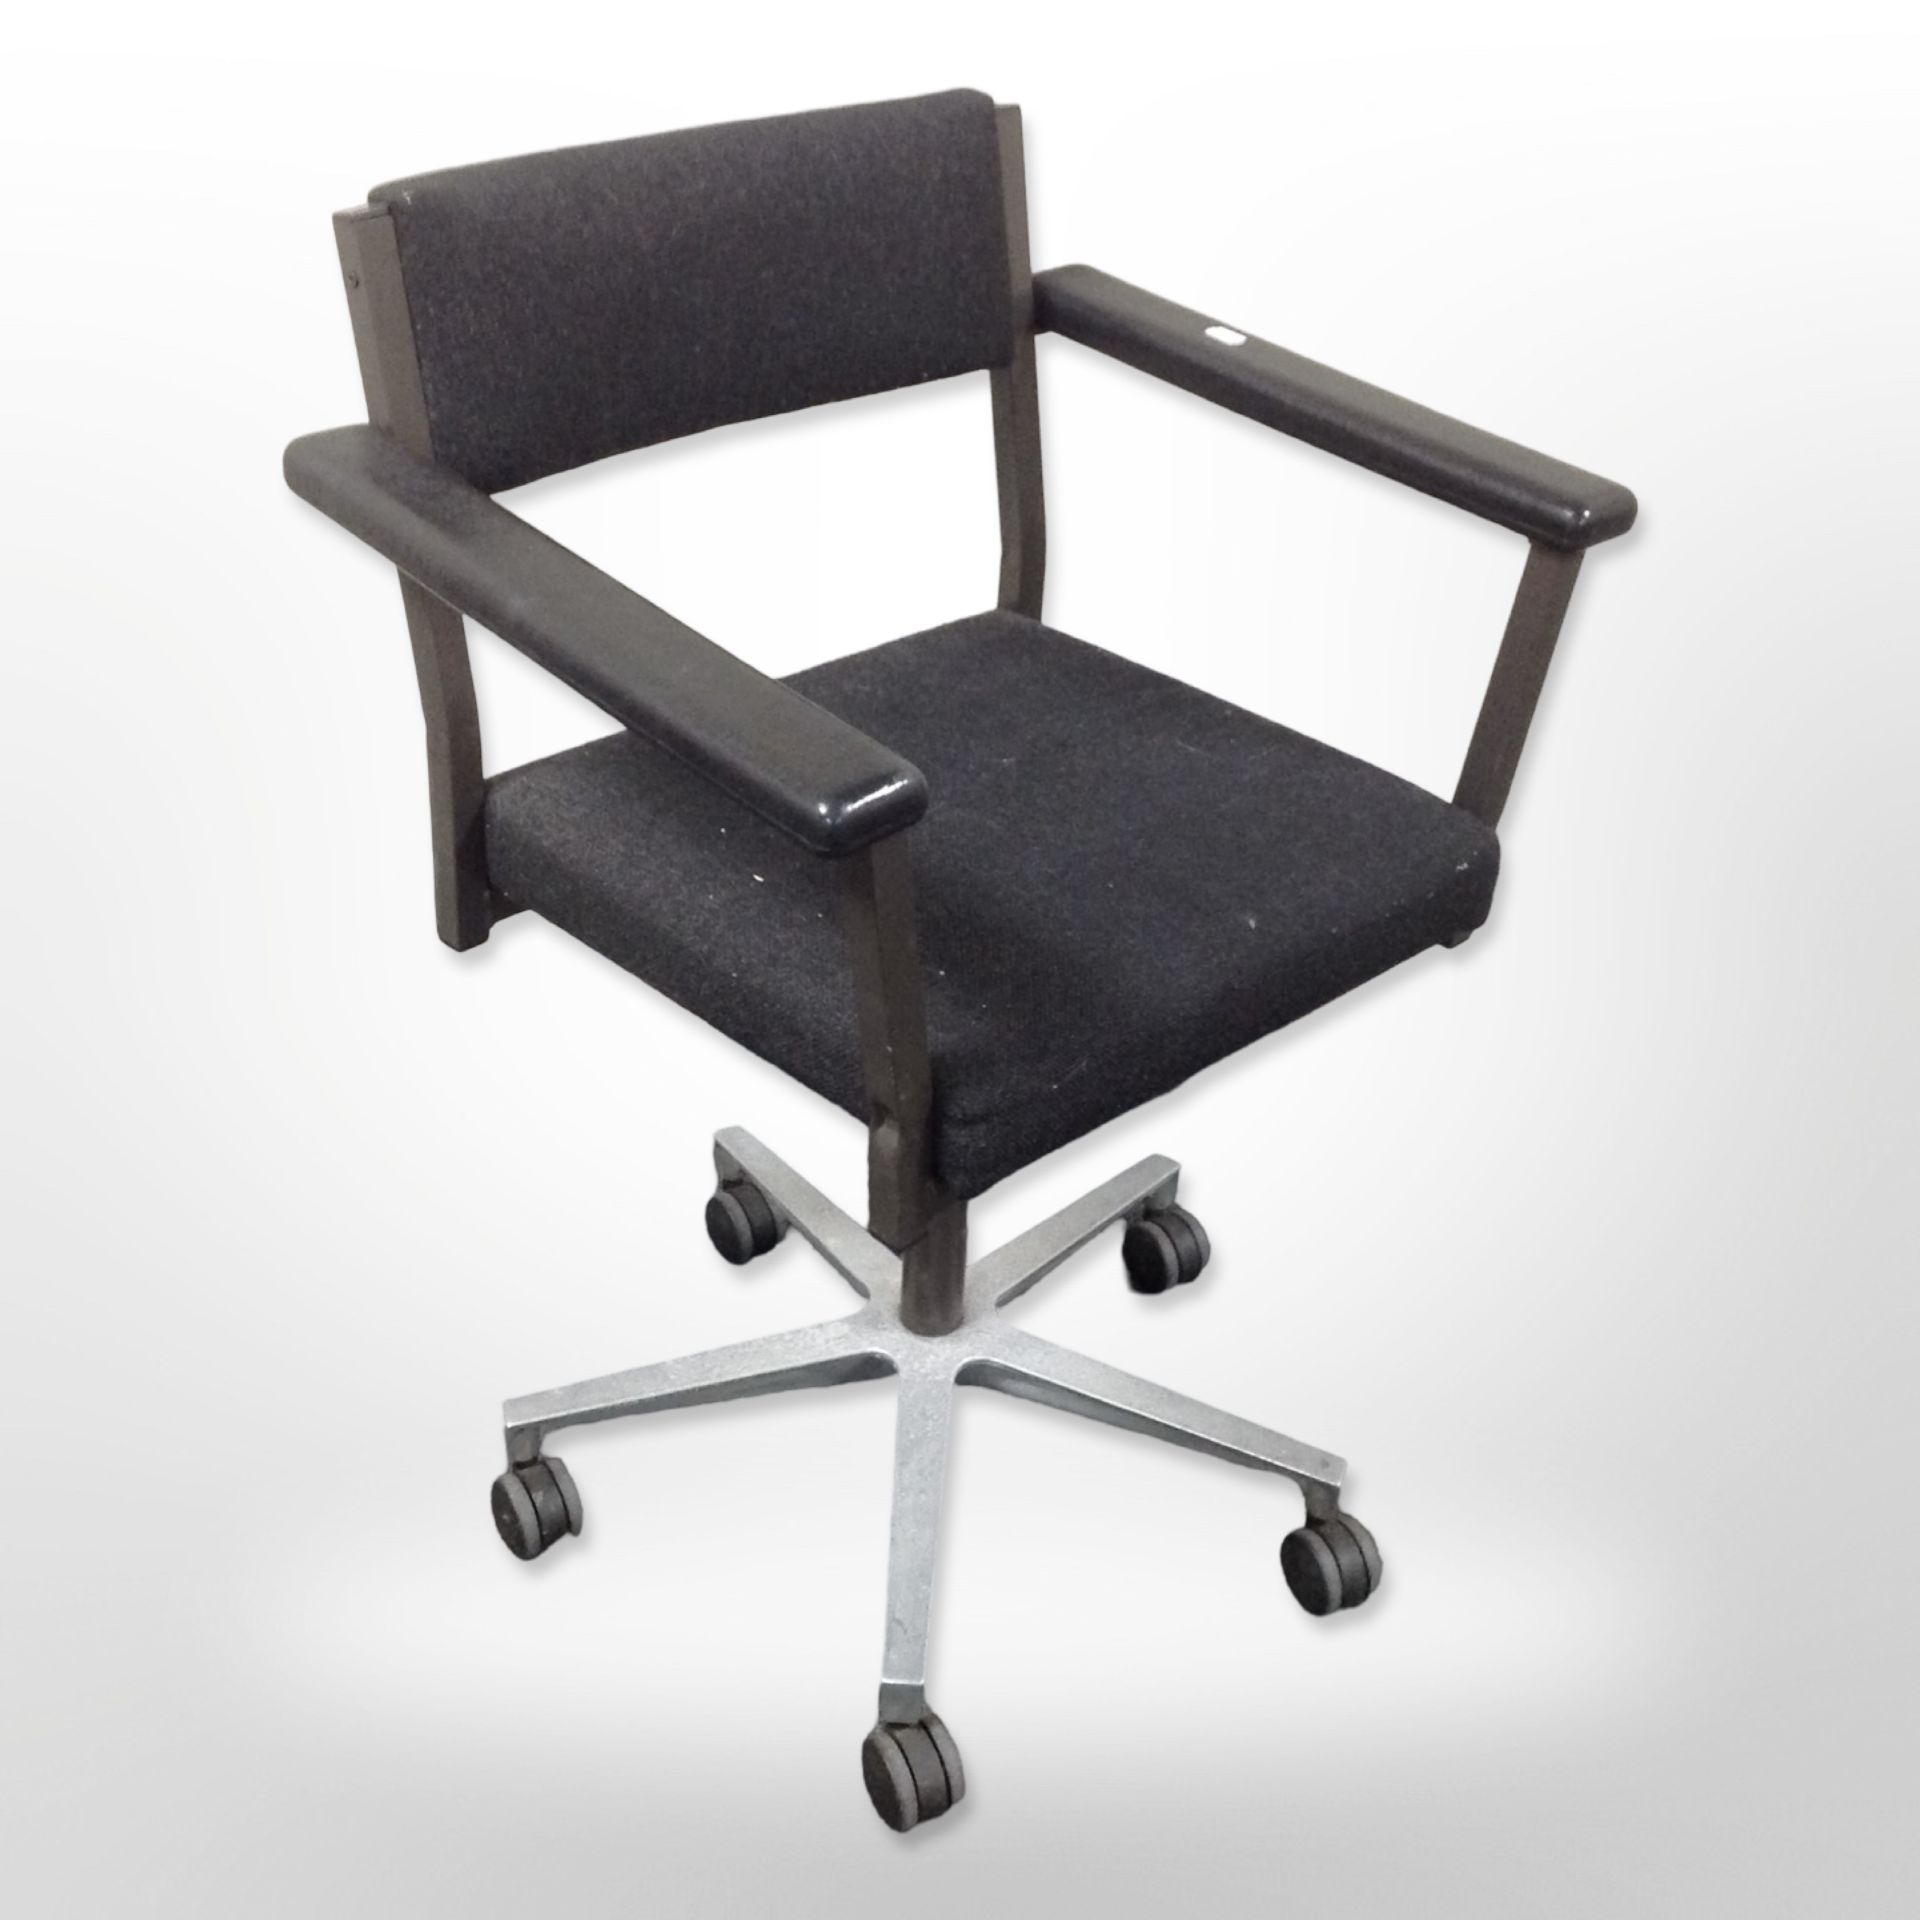 A 20th century metal framed swivel computer chair,